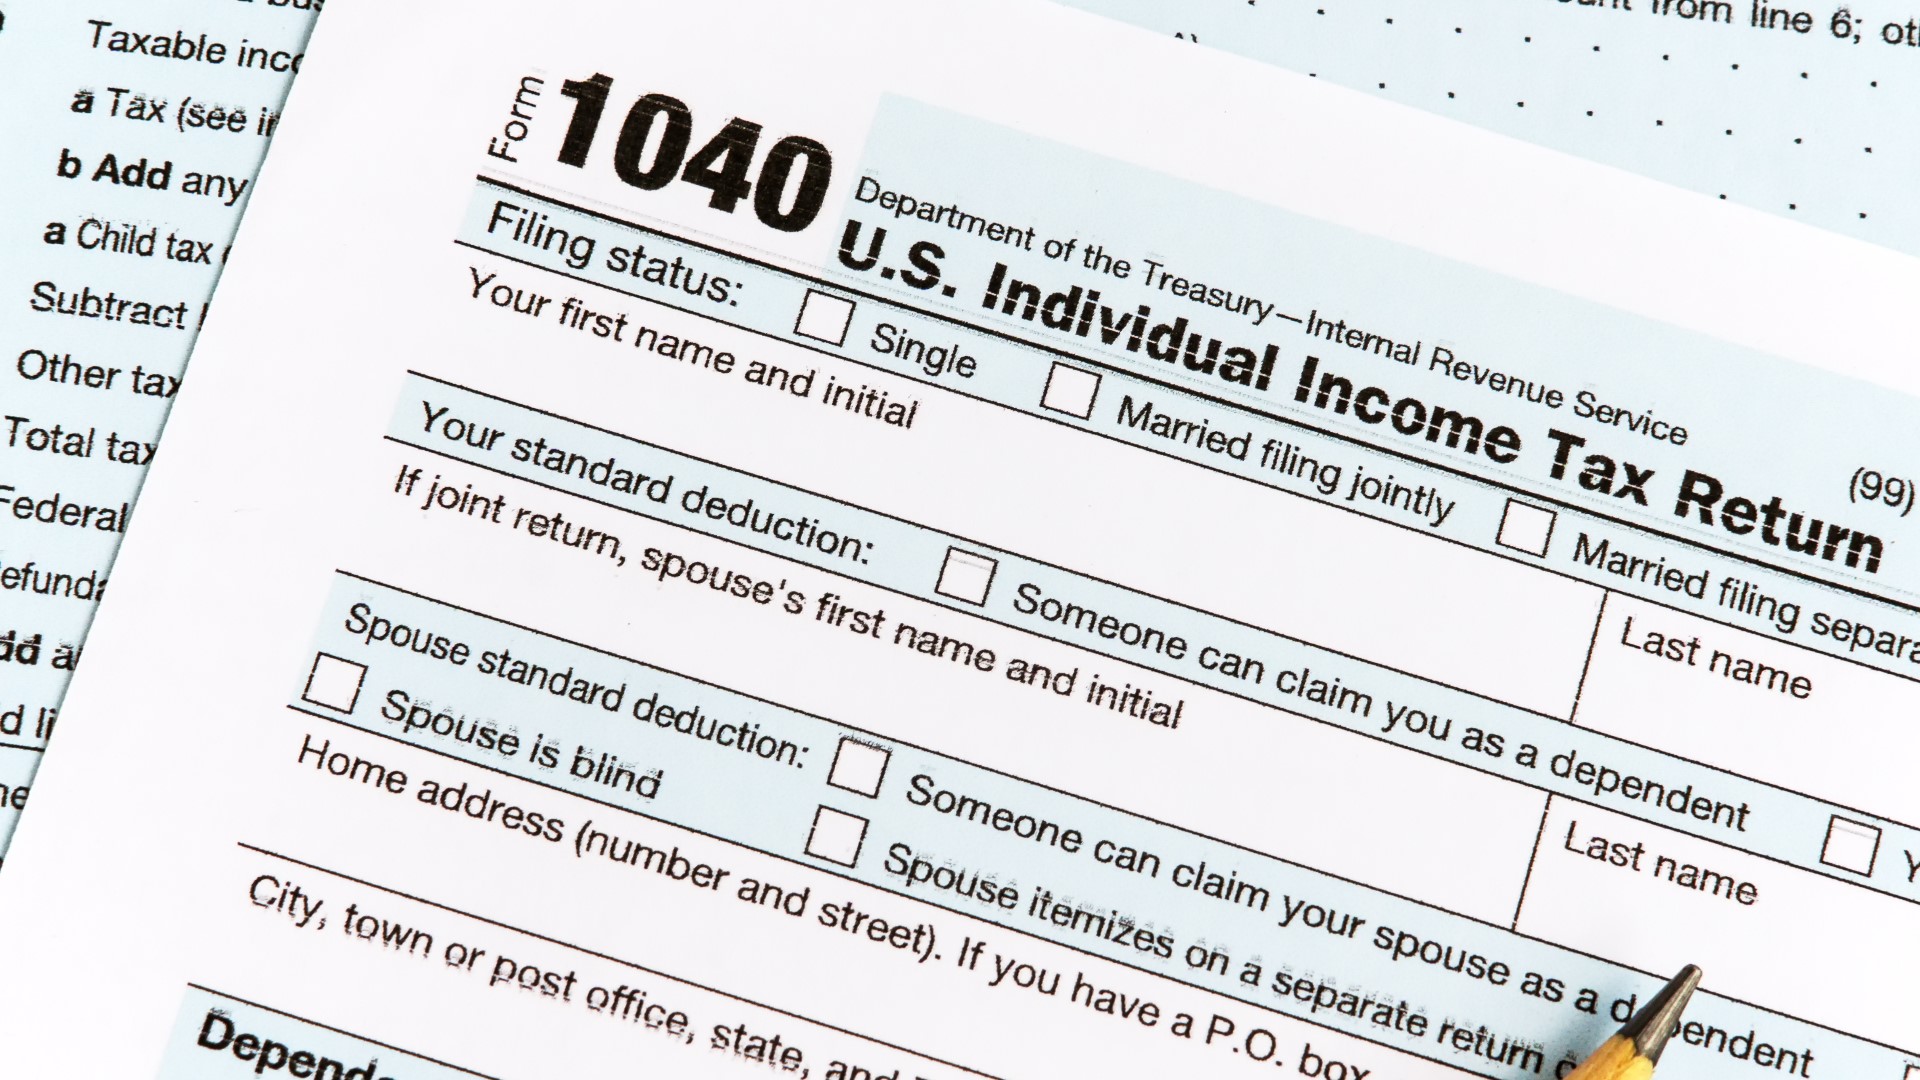 A new bill would give anyone who files an income tax return in South Carolina at least a $100 rebate.